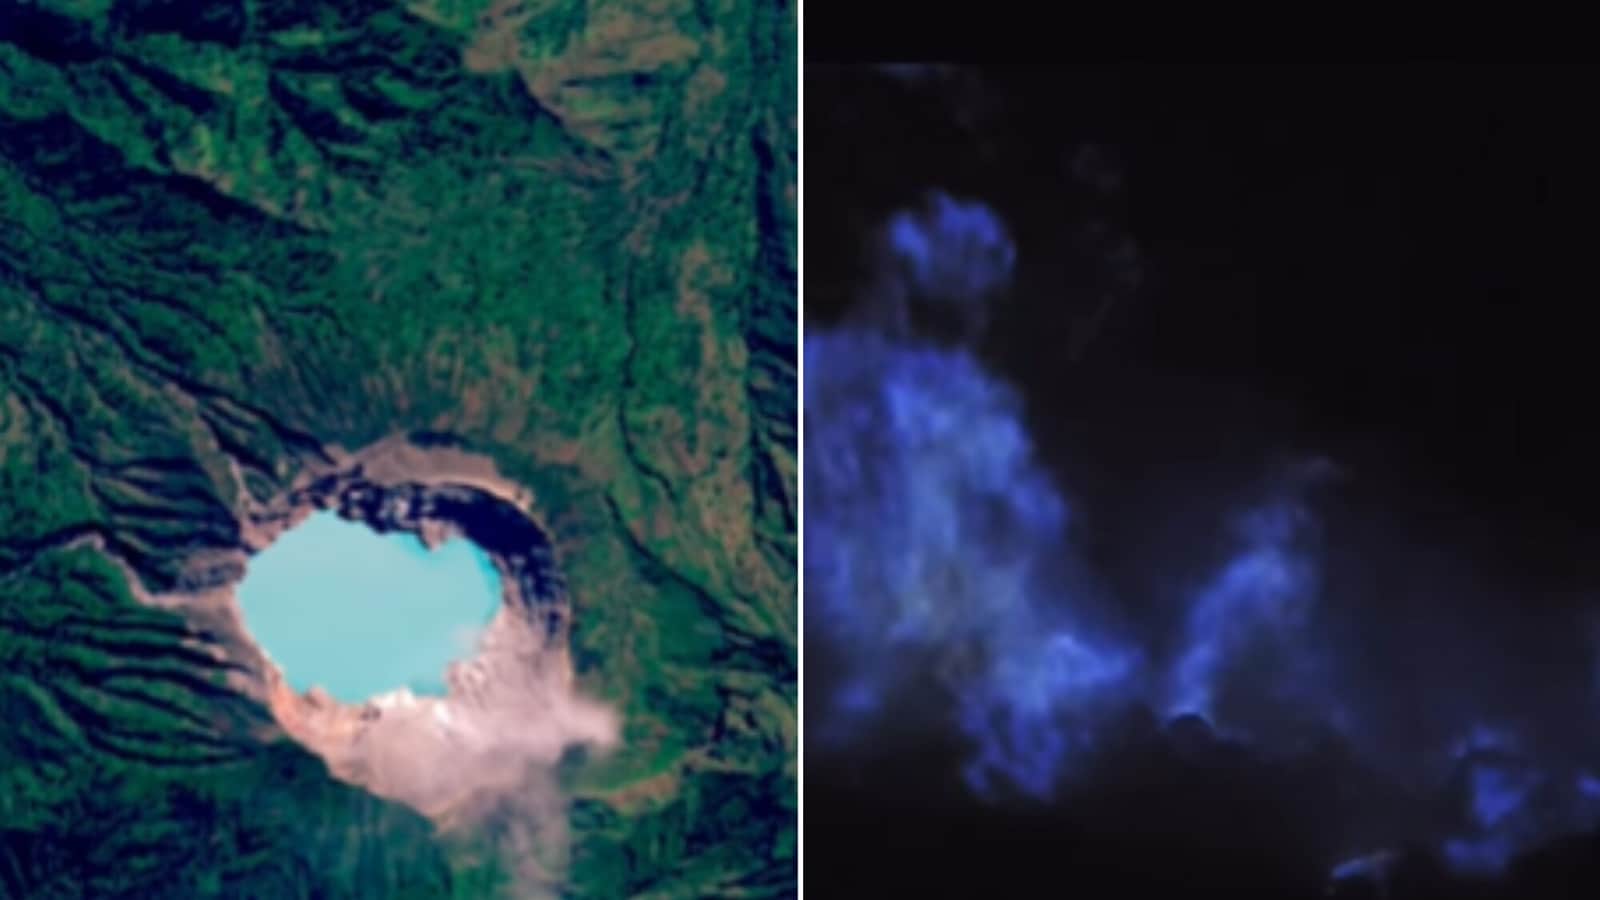 ESA shares video of ‘spooky’ volcanic lake that spews ‘eerie’ blue flames. Watch